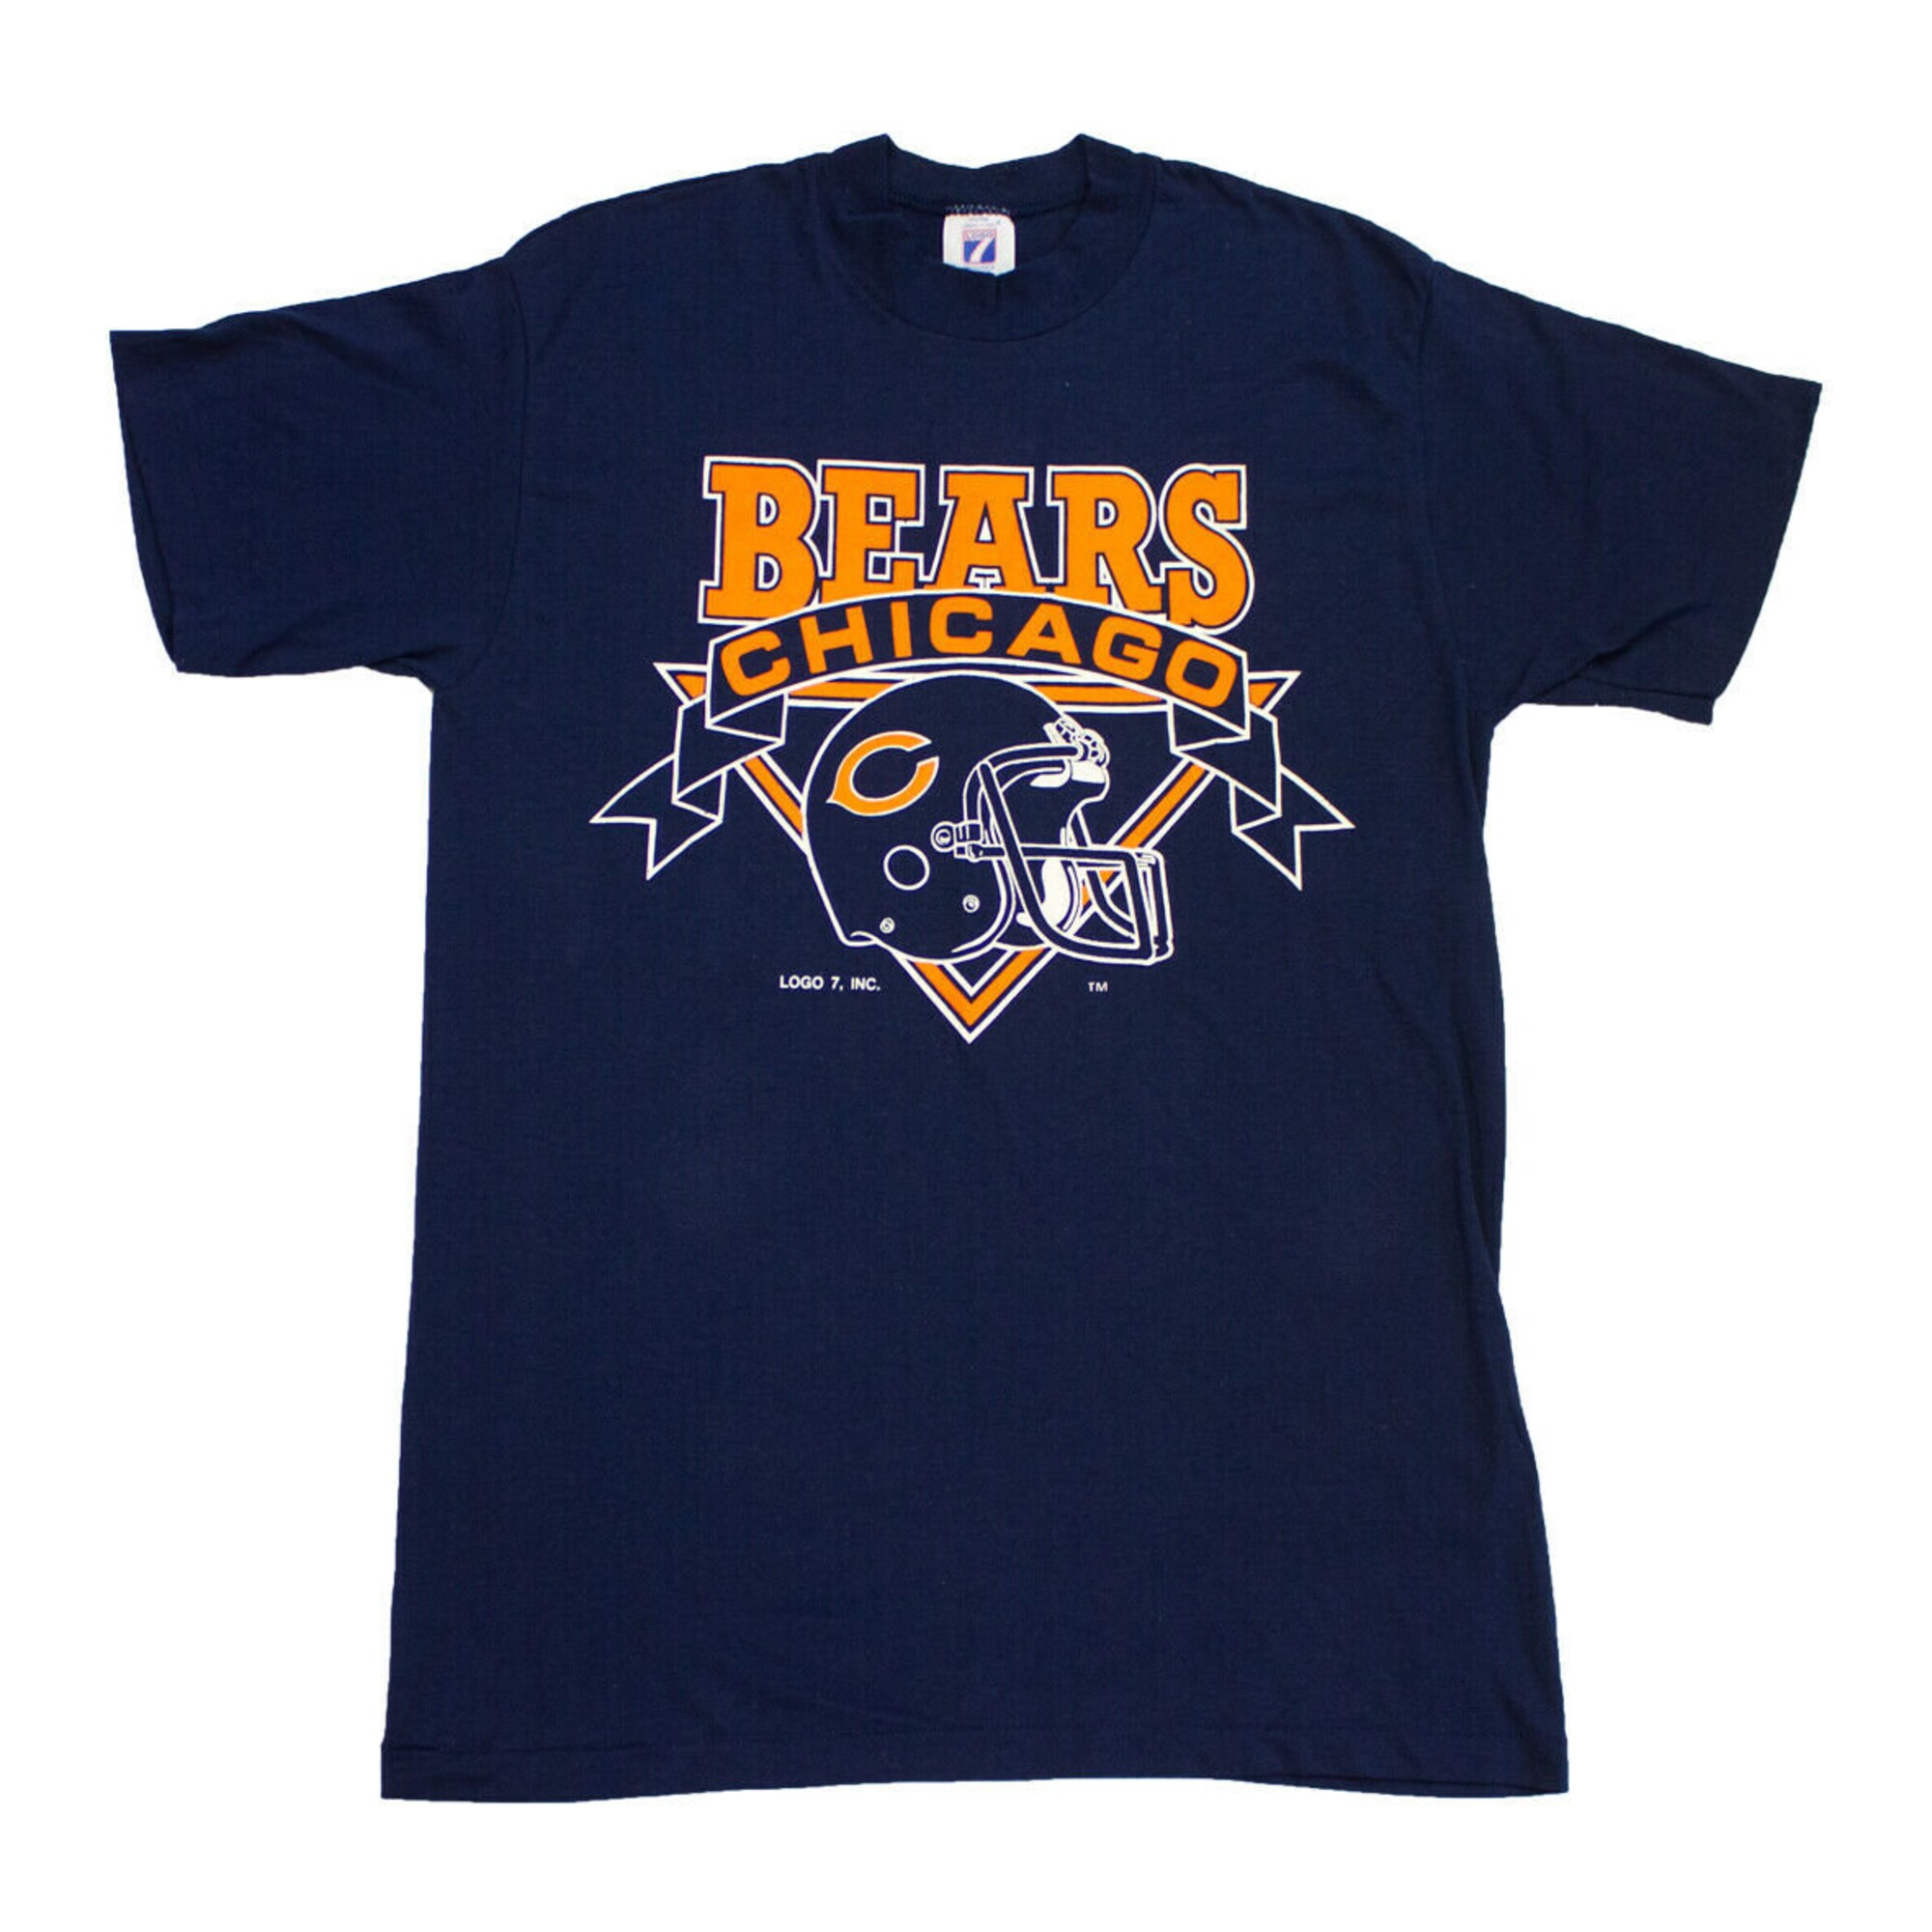 Discover Chicago Bears Tshirt h